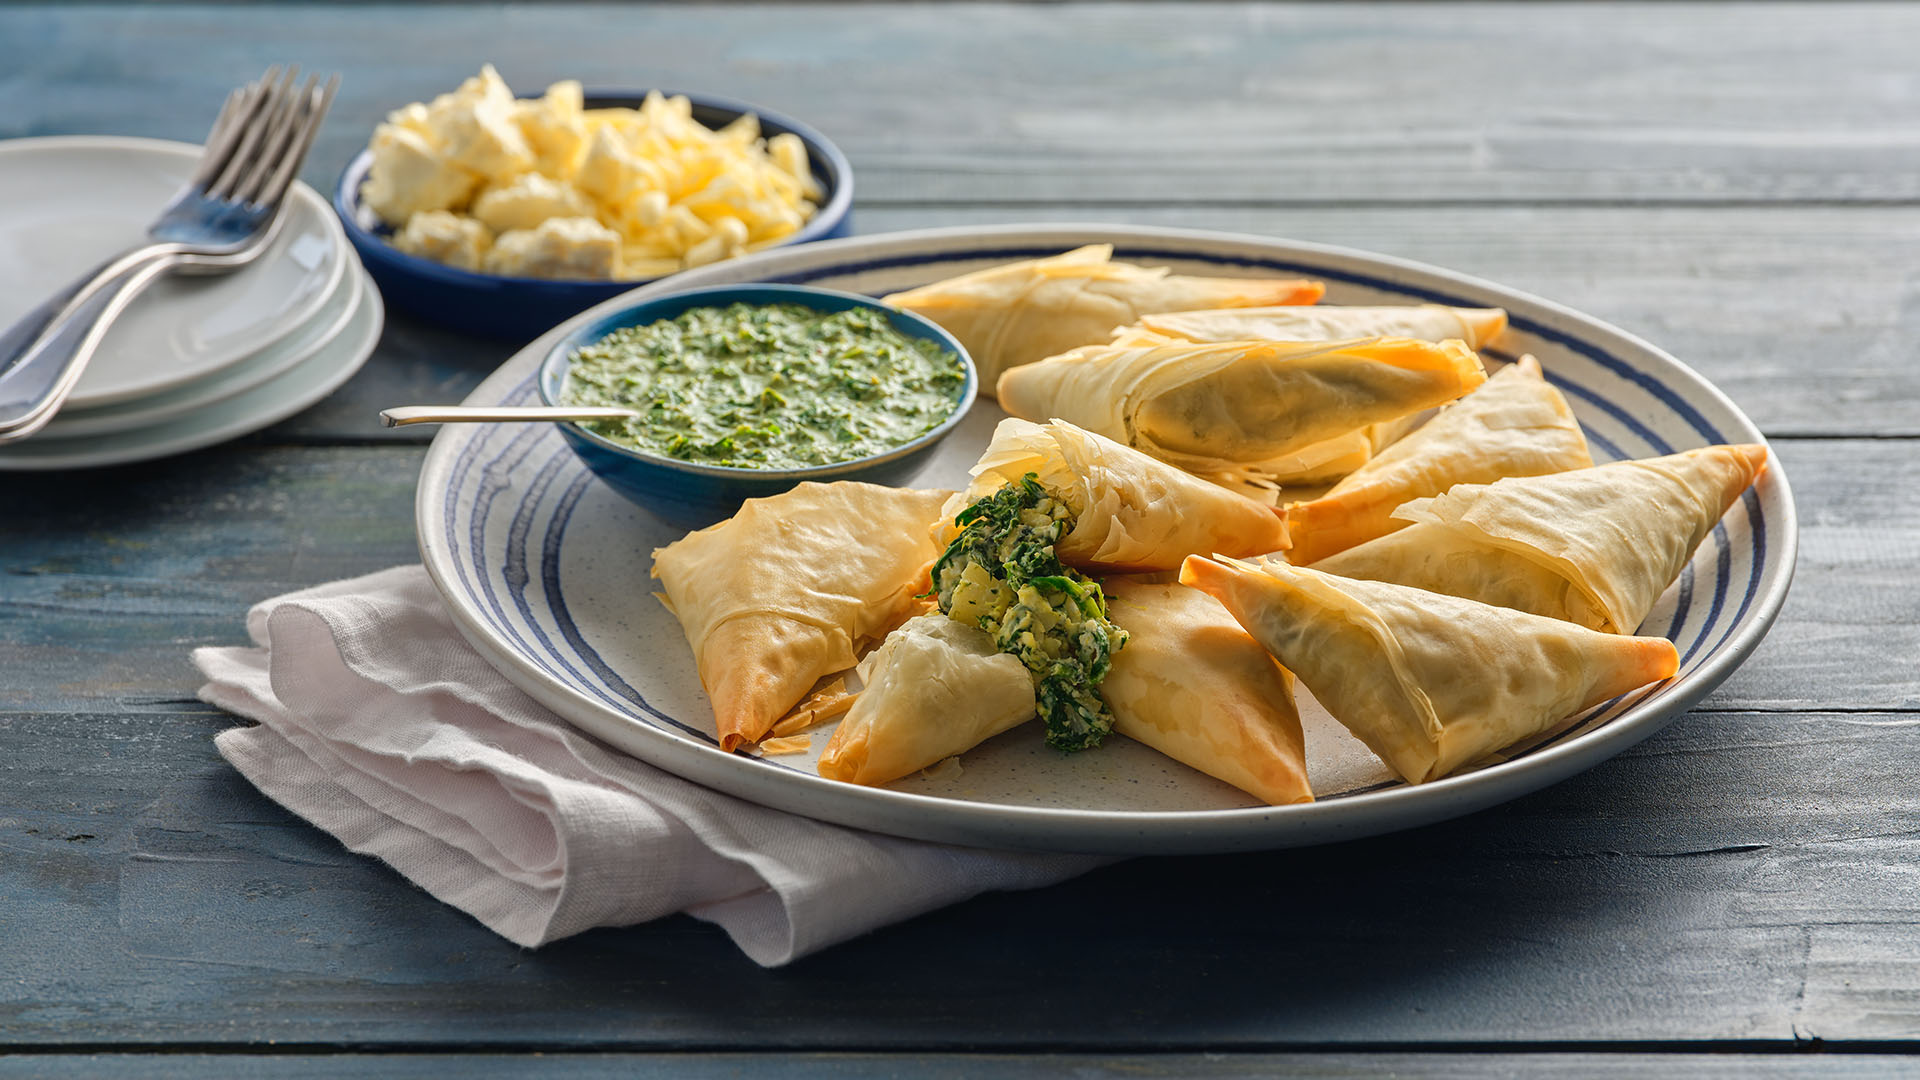 Samosas on a round plate with blue stripes next to a stack of white plates with forks on top, and a small round bowl filled with crumbled cheese.